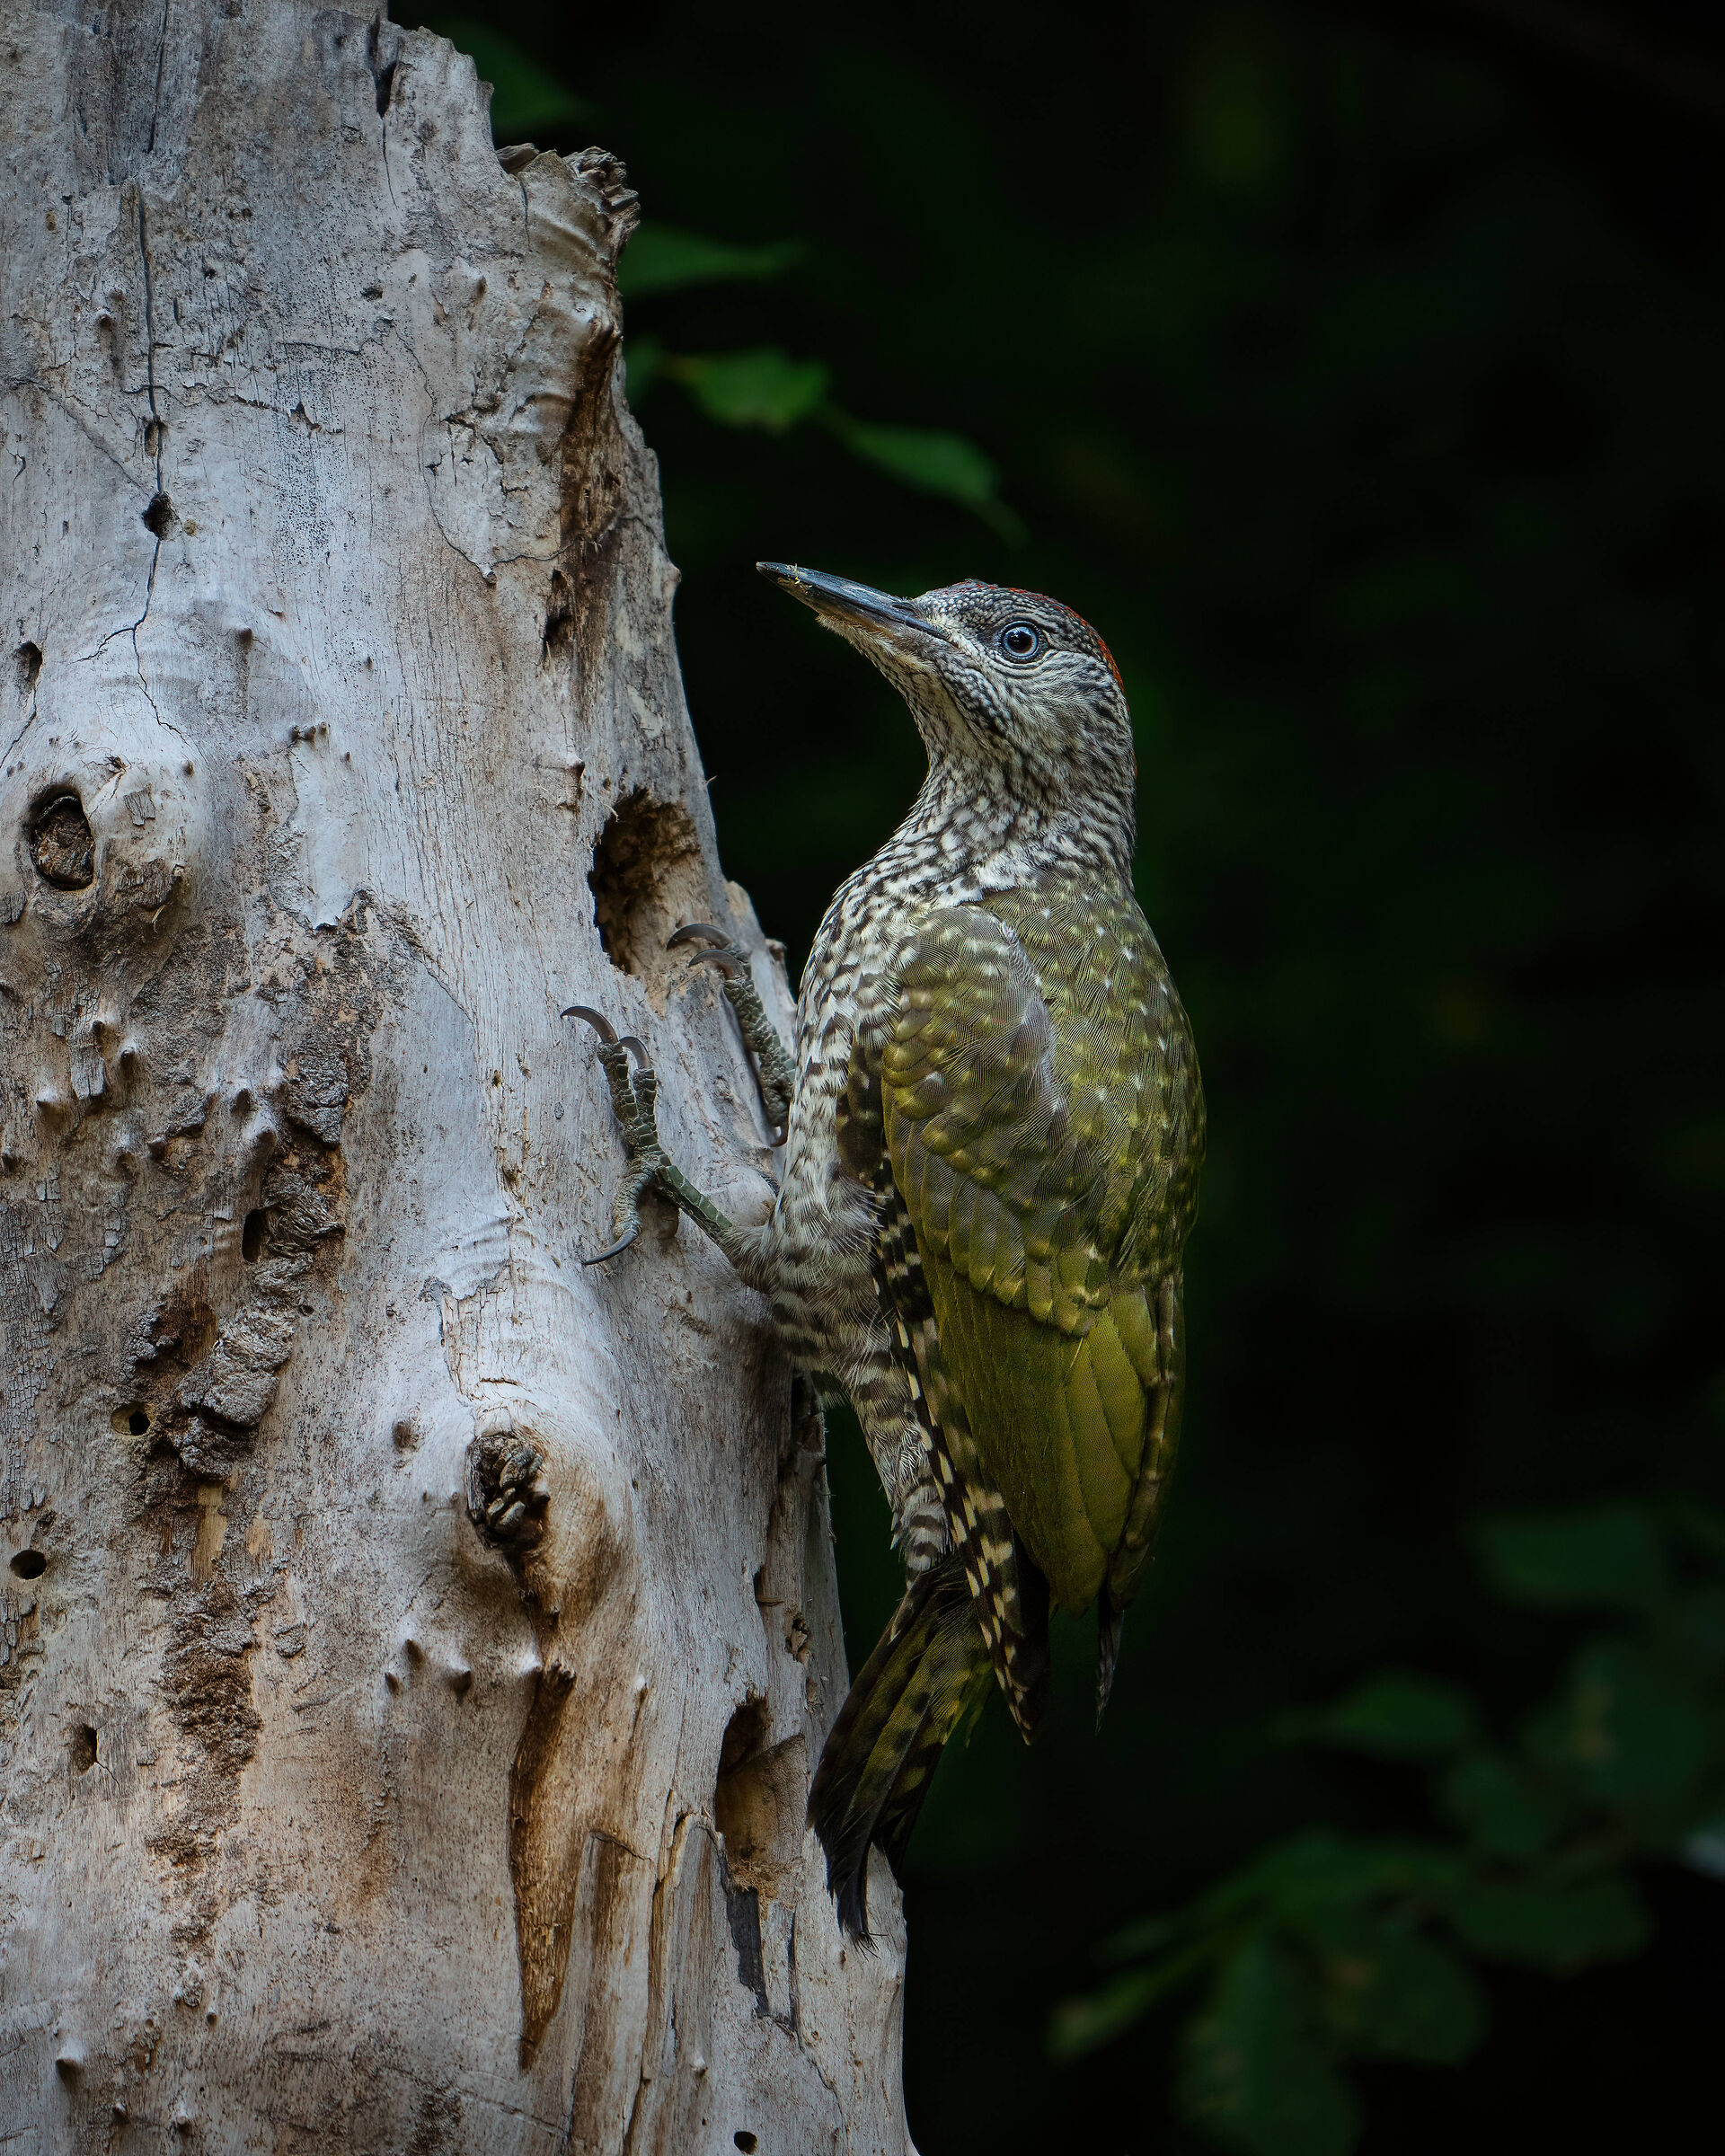 Green woodpecker and game of contrasts...